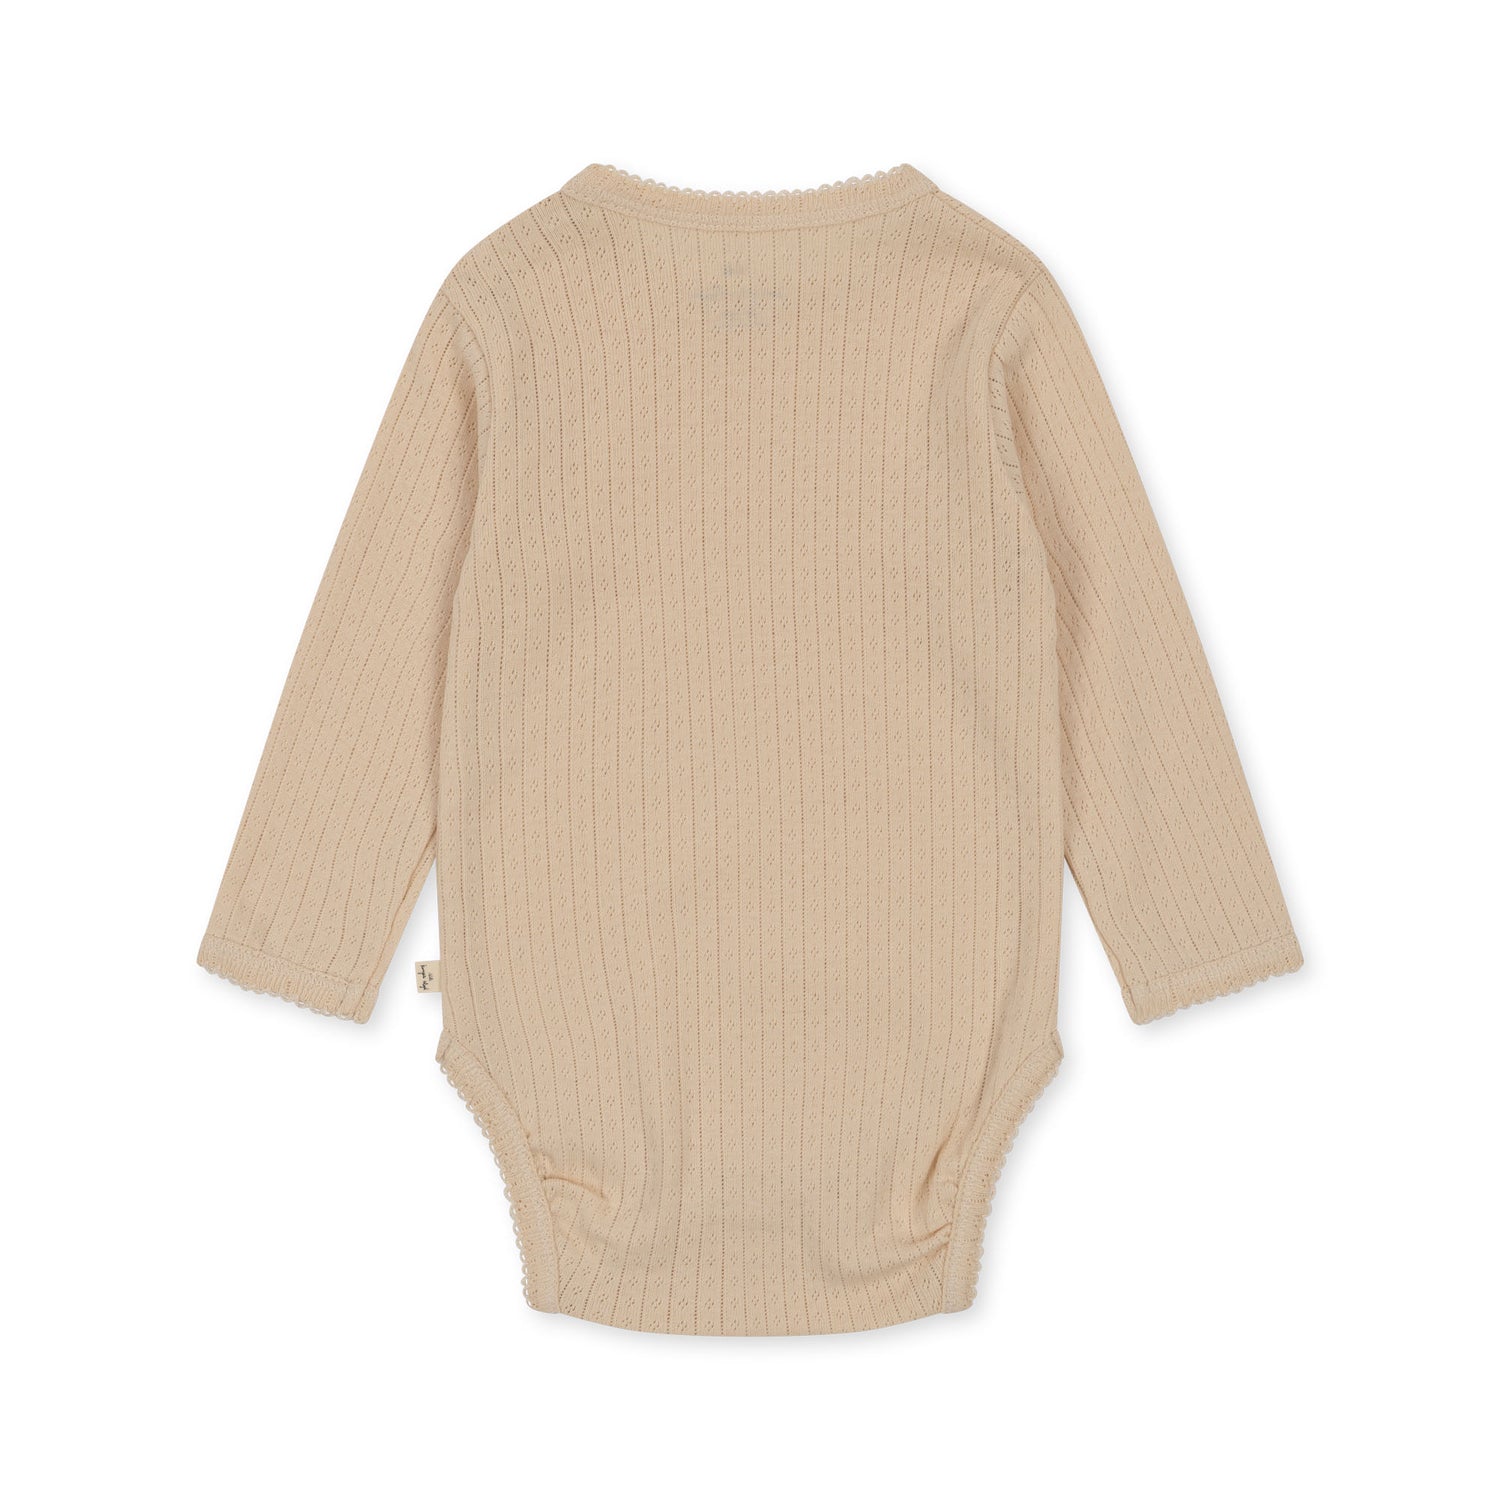 Minnie Body 'Brazilian Sand' - The Little One • Family.Concept.Store. 